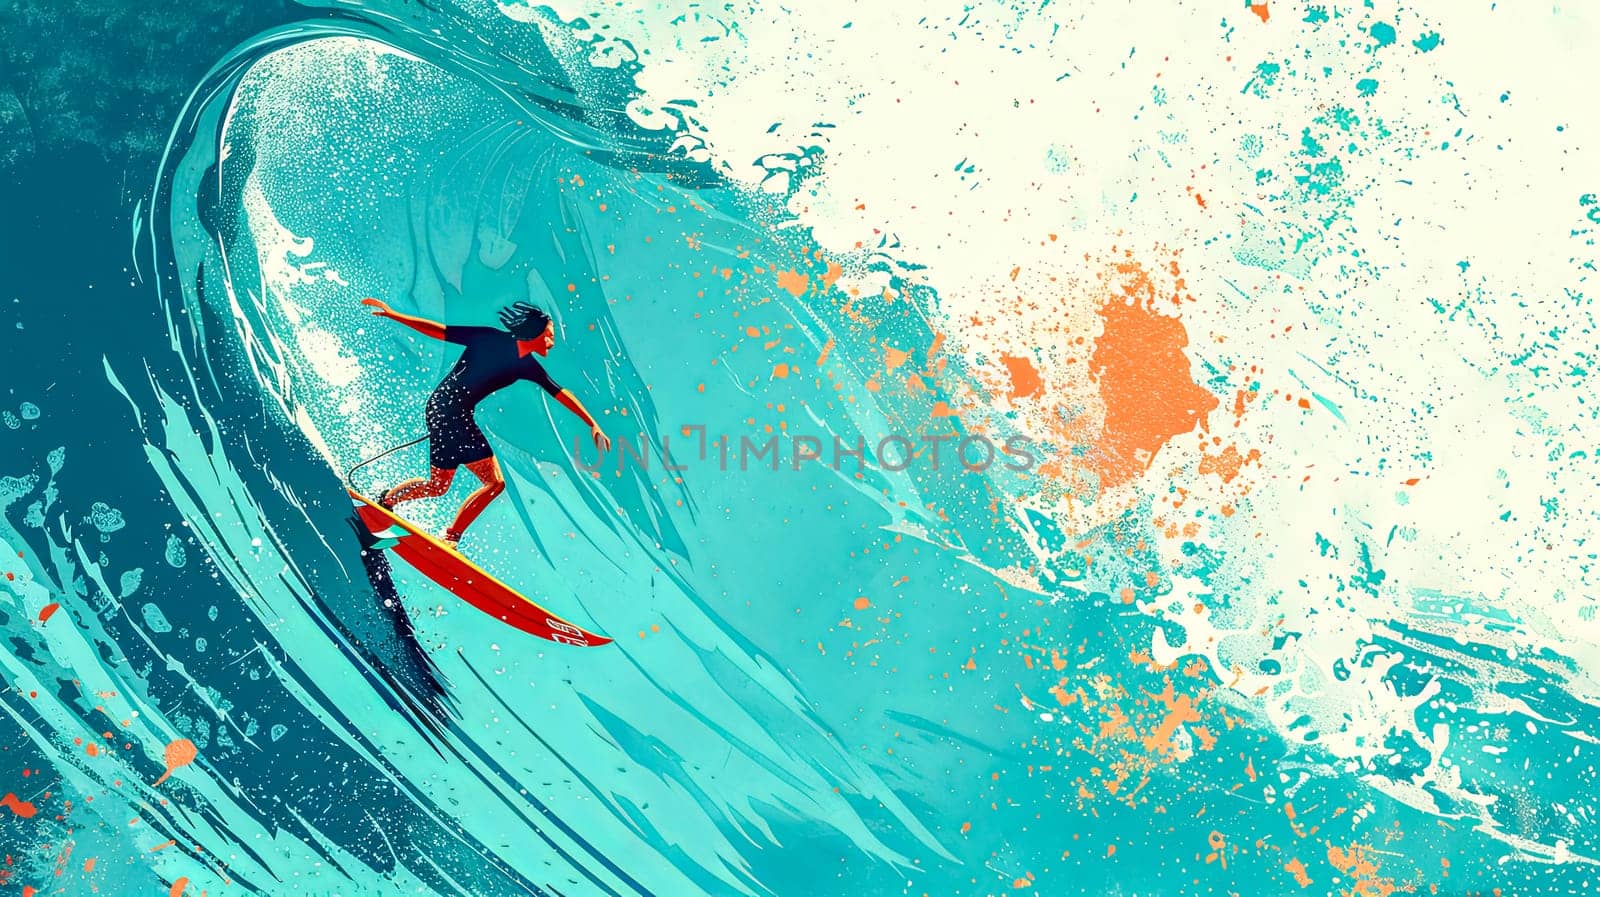 Dynamic illustration of a surfer expertly navigating through a giant wave's tube